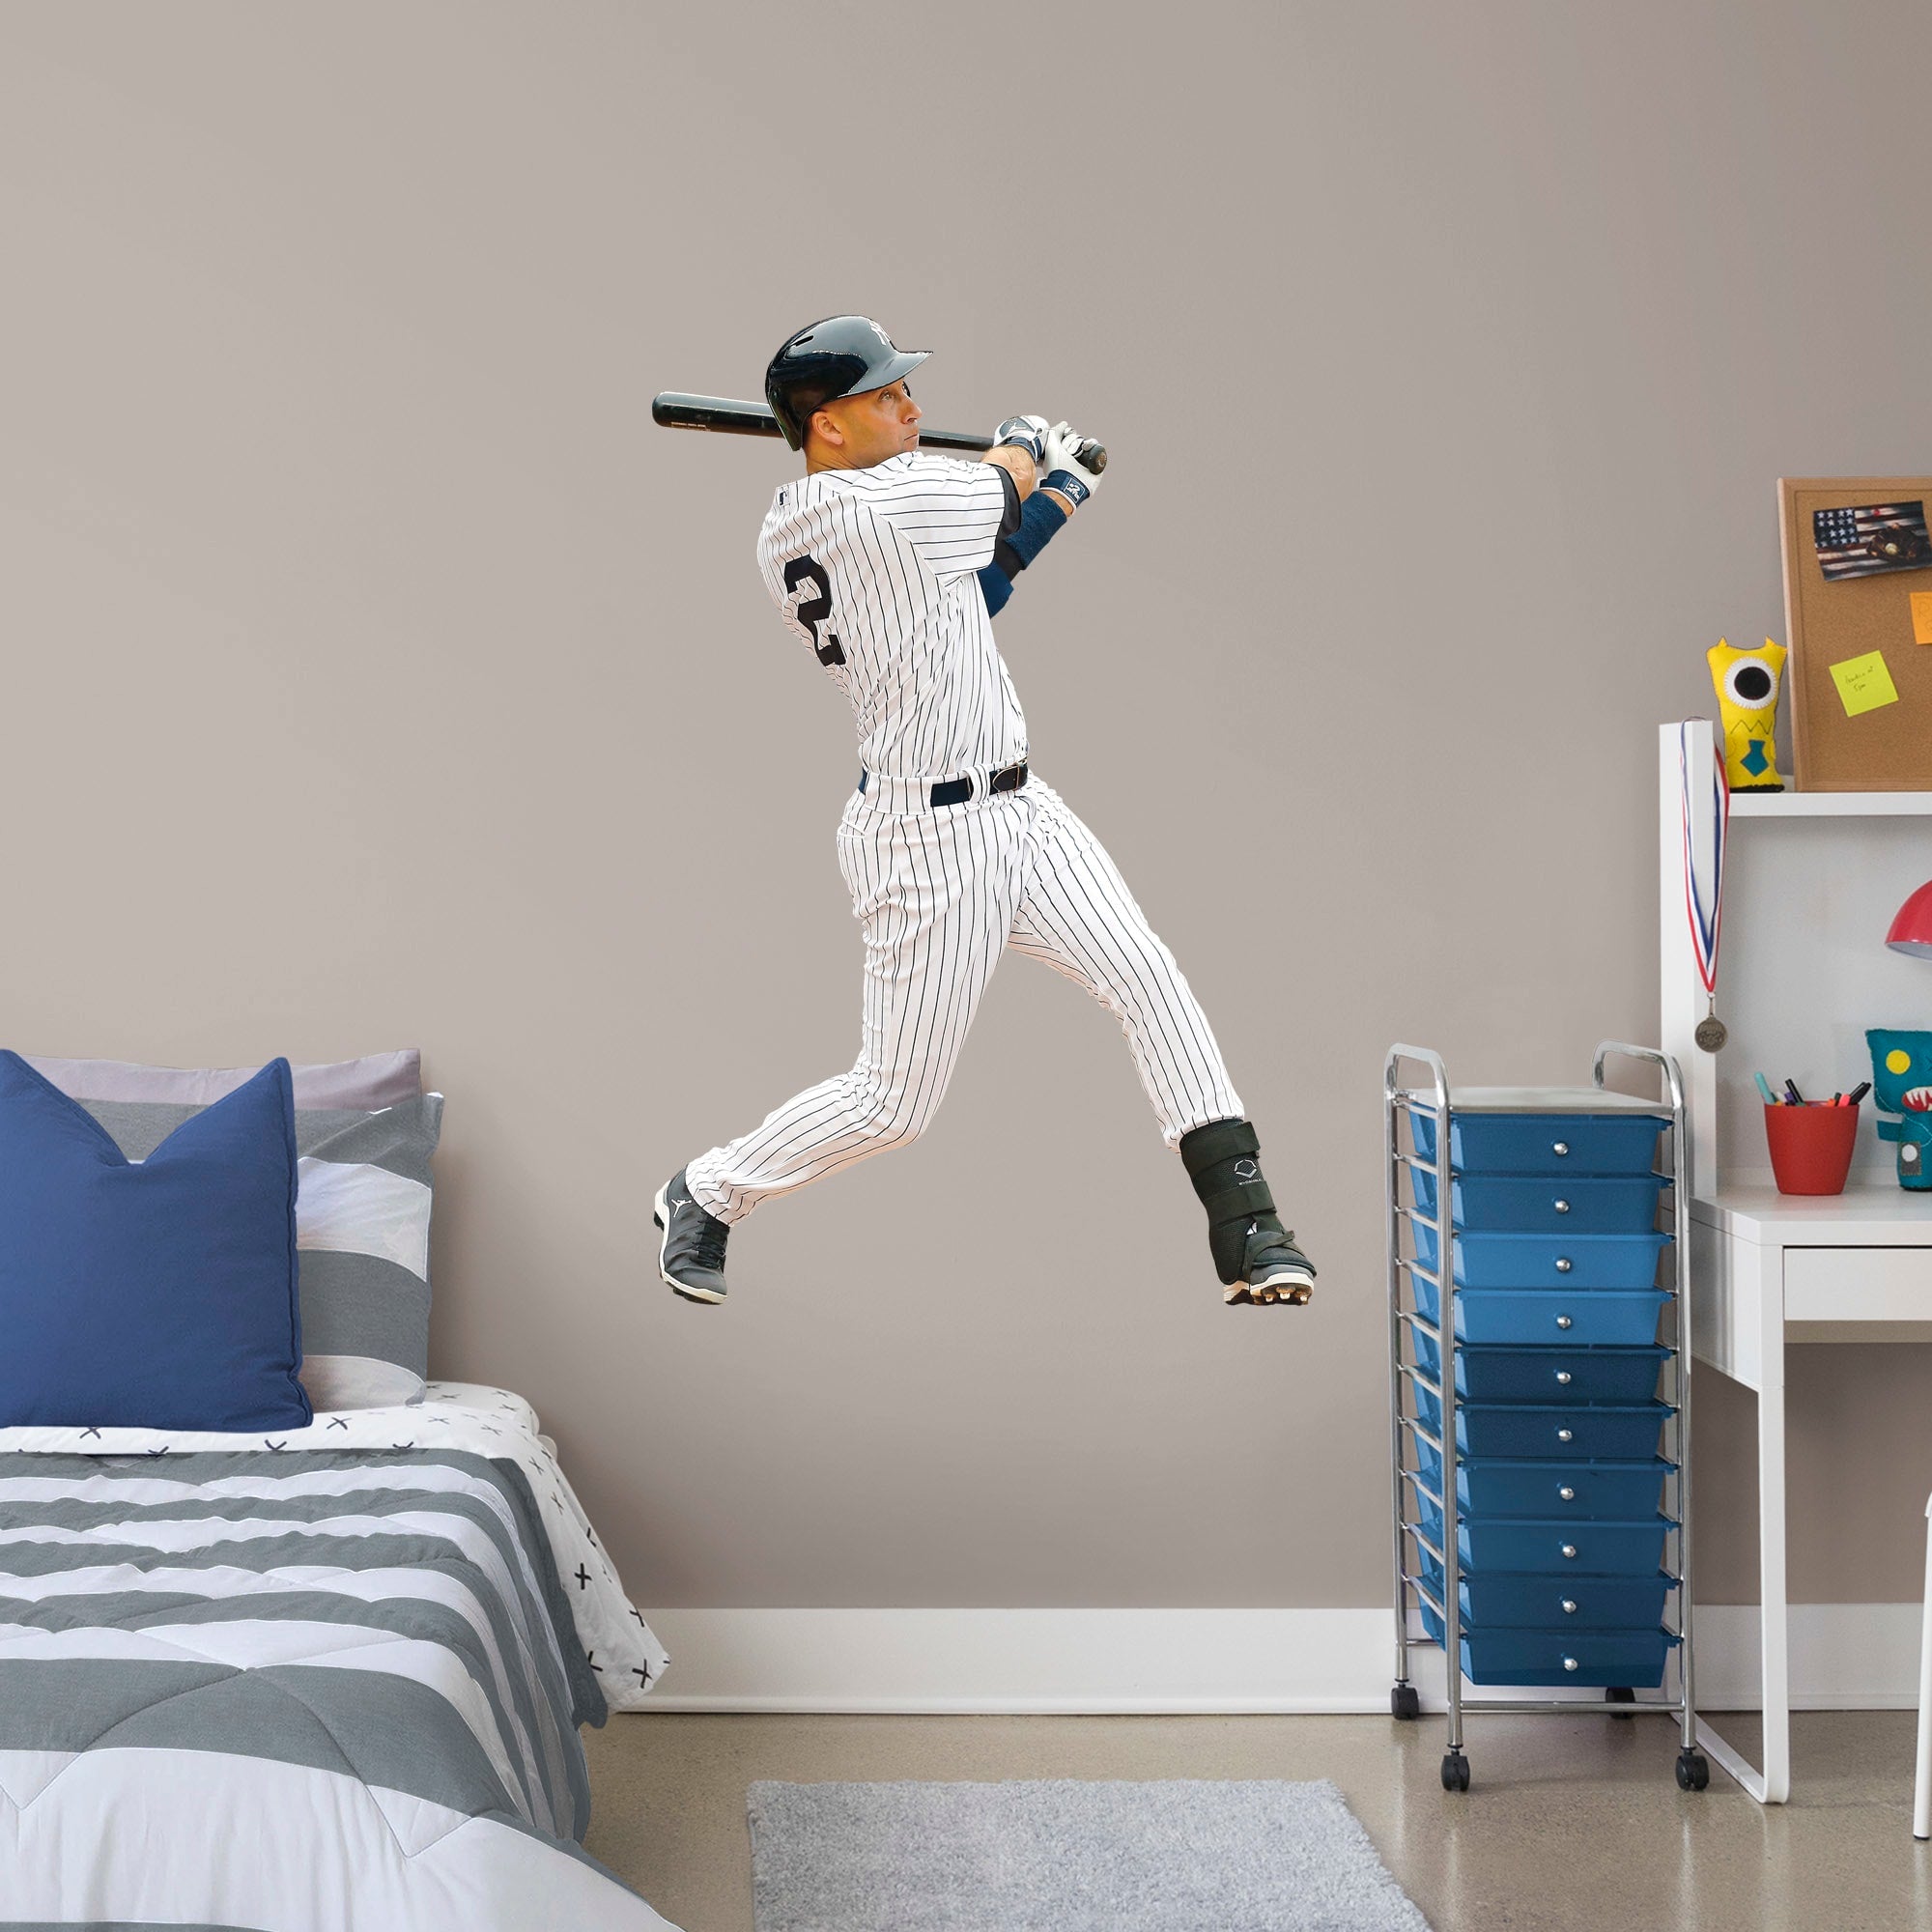 Derek Jeter for New York Yankees: Legacy - Officially Licensed MLB Removable Wall Decal Giant Athlete + 2 Decals (35"W x 51"H) b